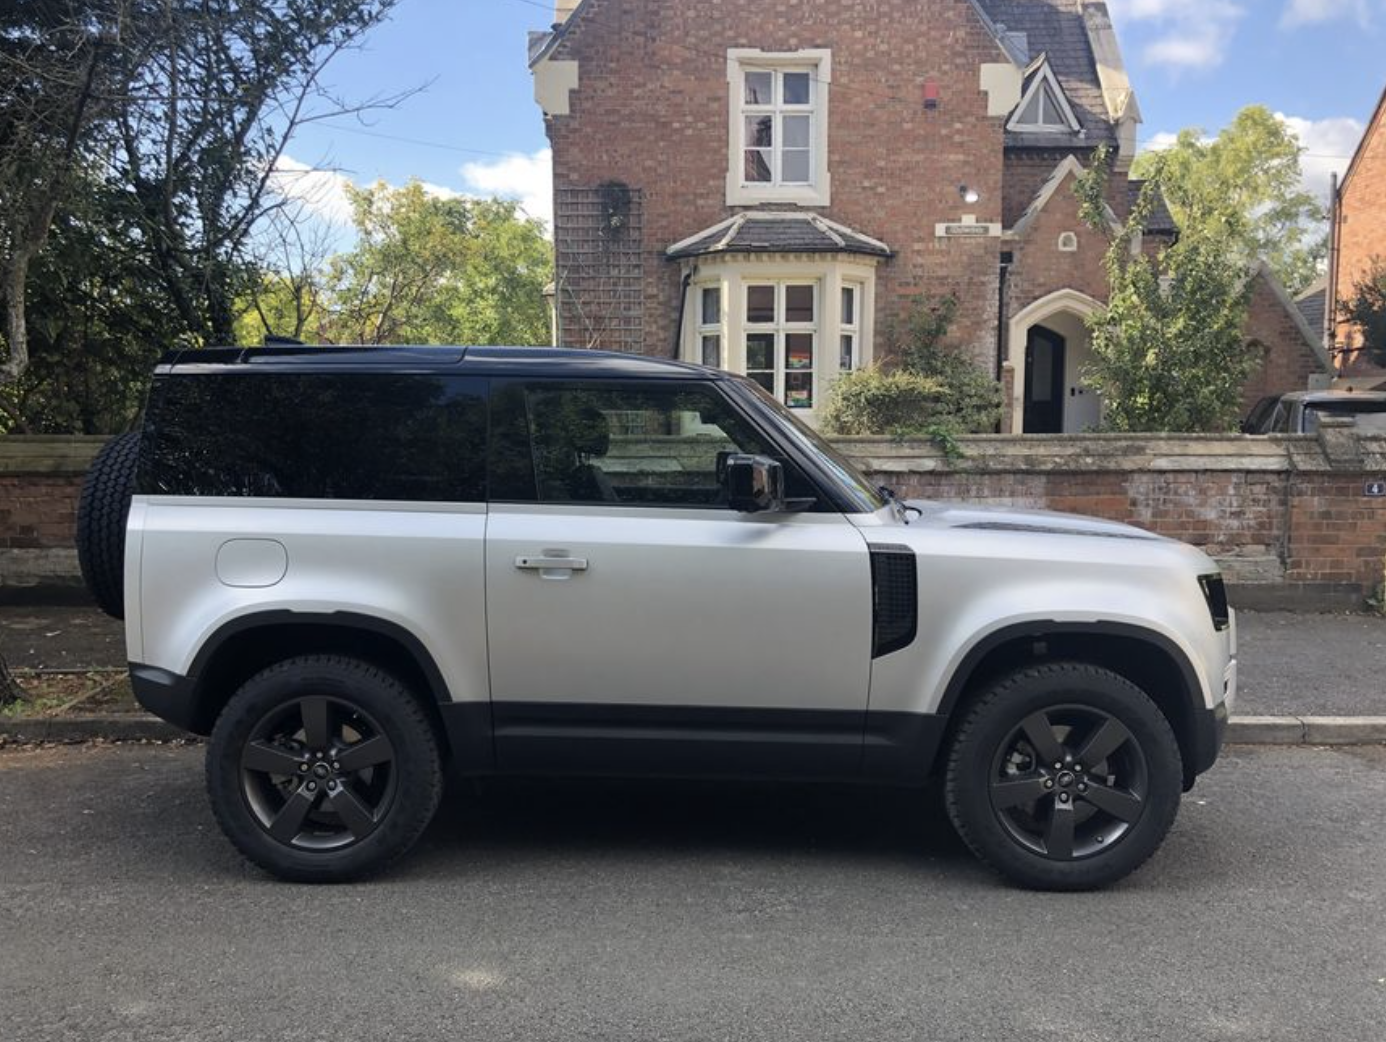 No Signature Graphic Build. Am I alone? - Page 3 - Land Rover Forums ...